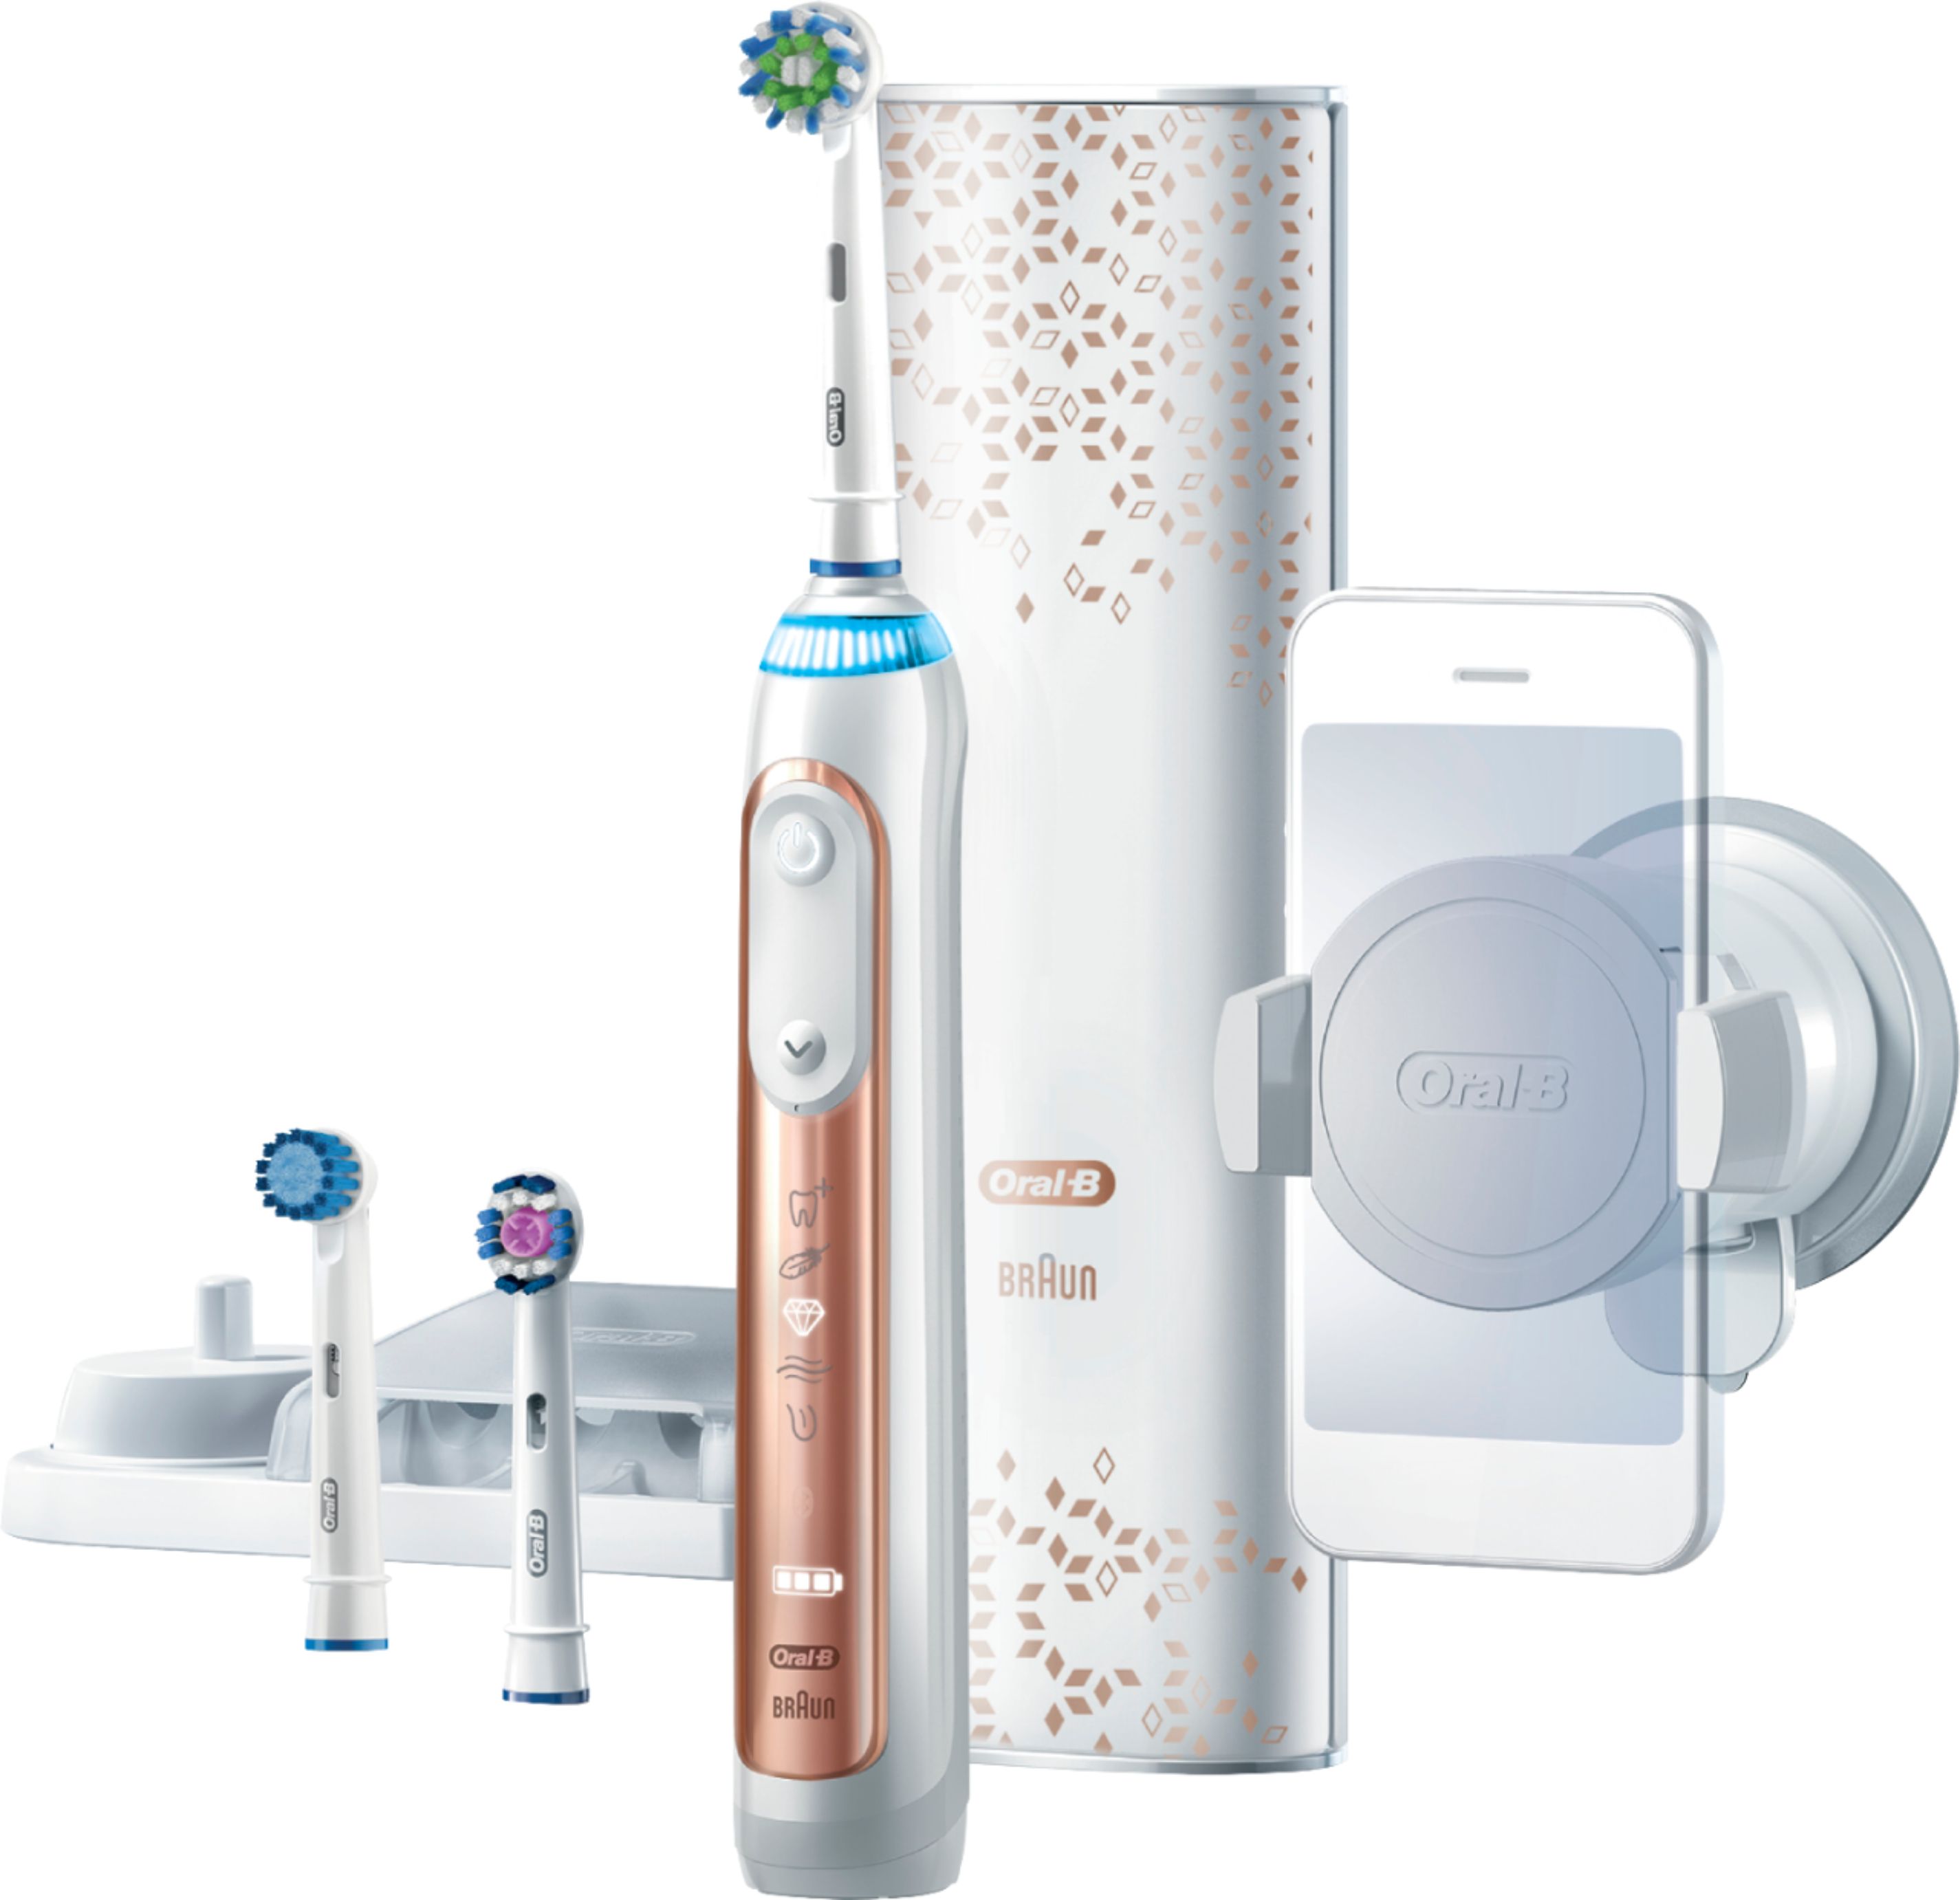 Oral-B - Genius Pro8000 Connected Rechargeable Toothbrush - Rose Gold